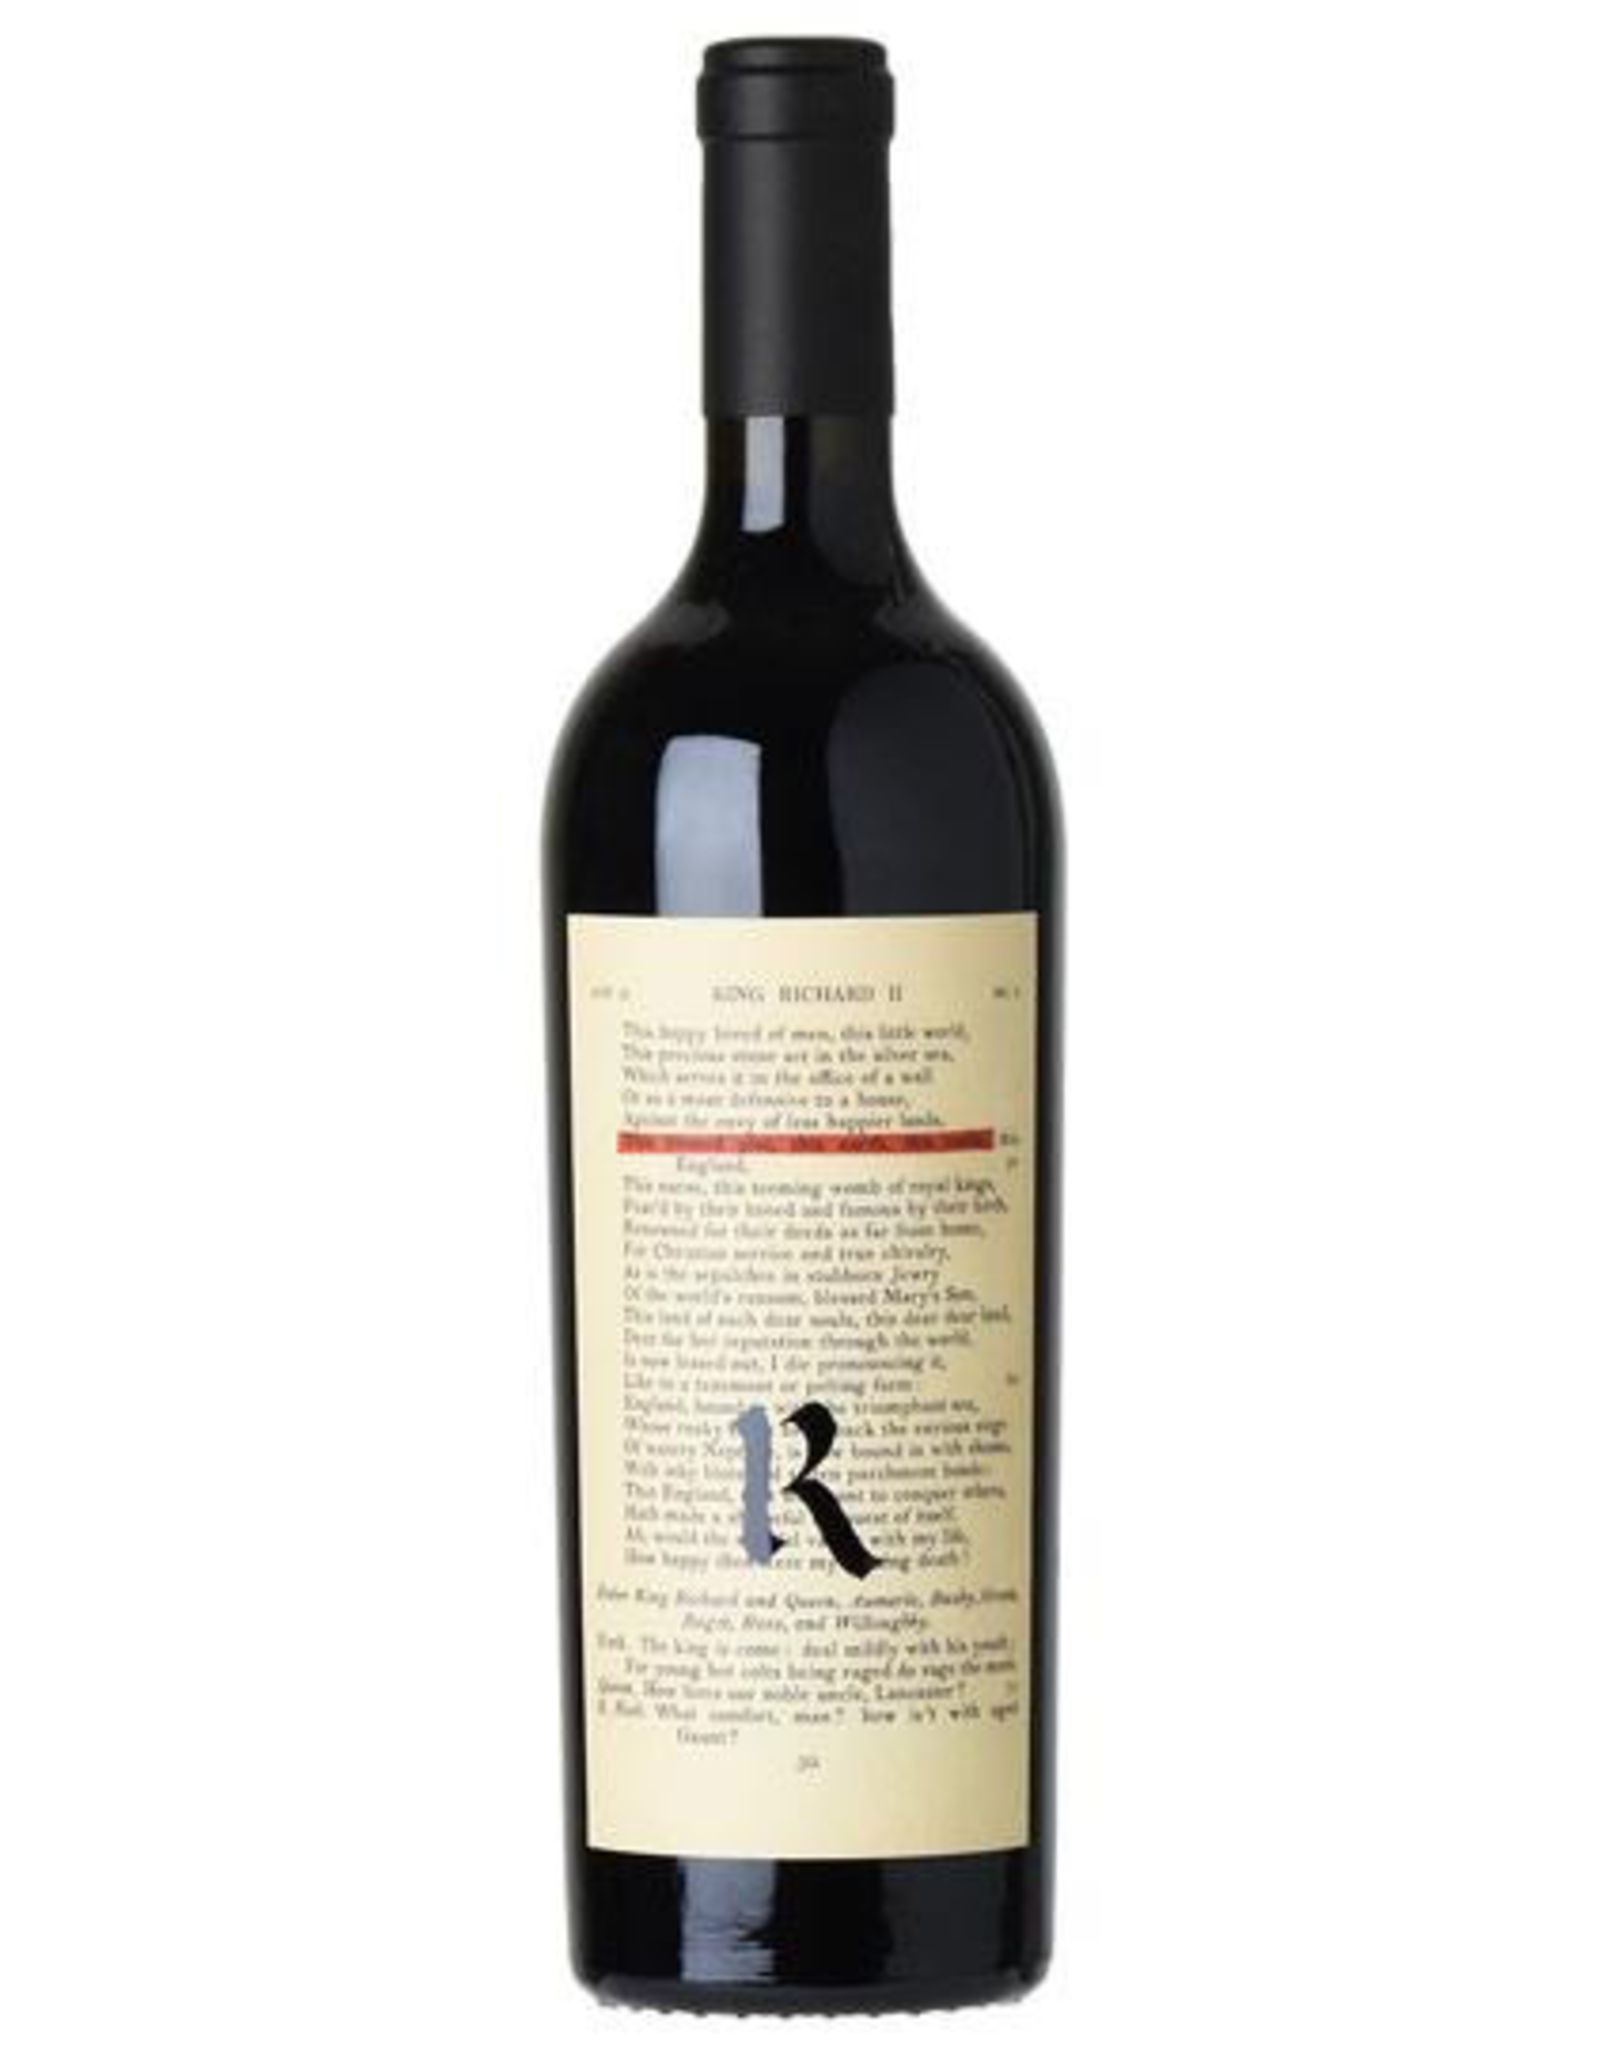 Red Wine 2018, Realm Cellars “The Bard”, Red Bordeaux Blend, Multi-Vineyard Blend, Napa Valley, California, 15.1% Alc, CTnr JS98, RP96